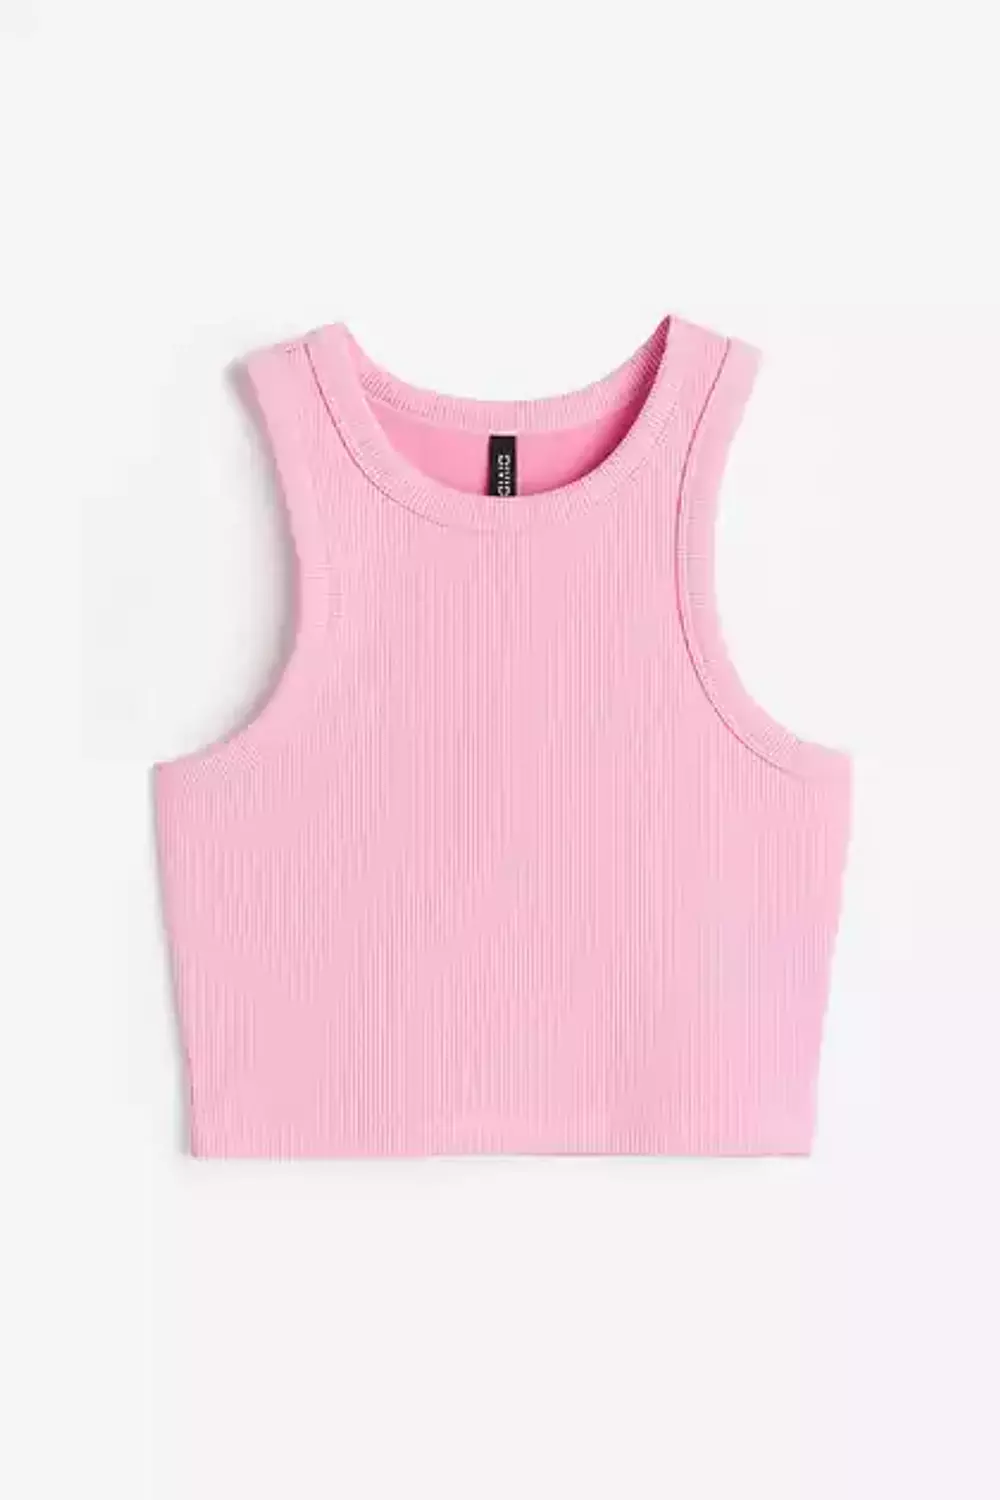 Pink Tank Top hover image